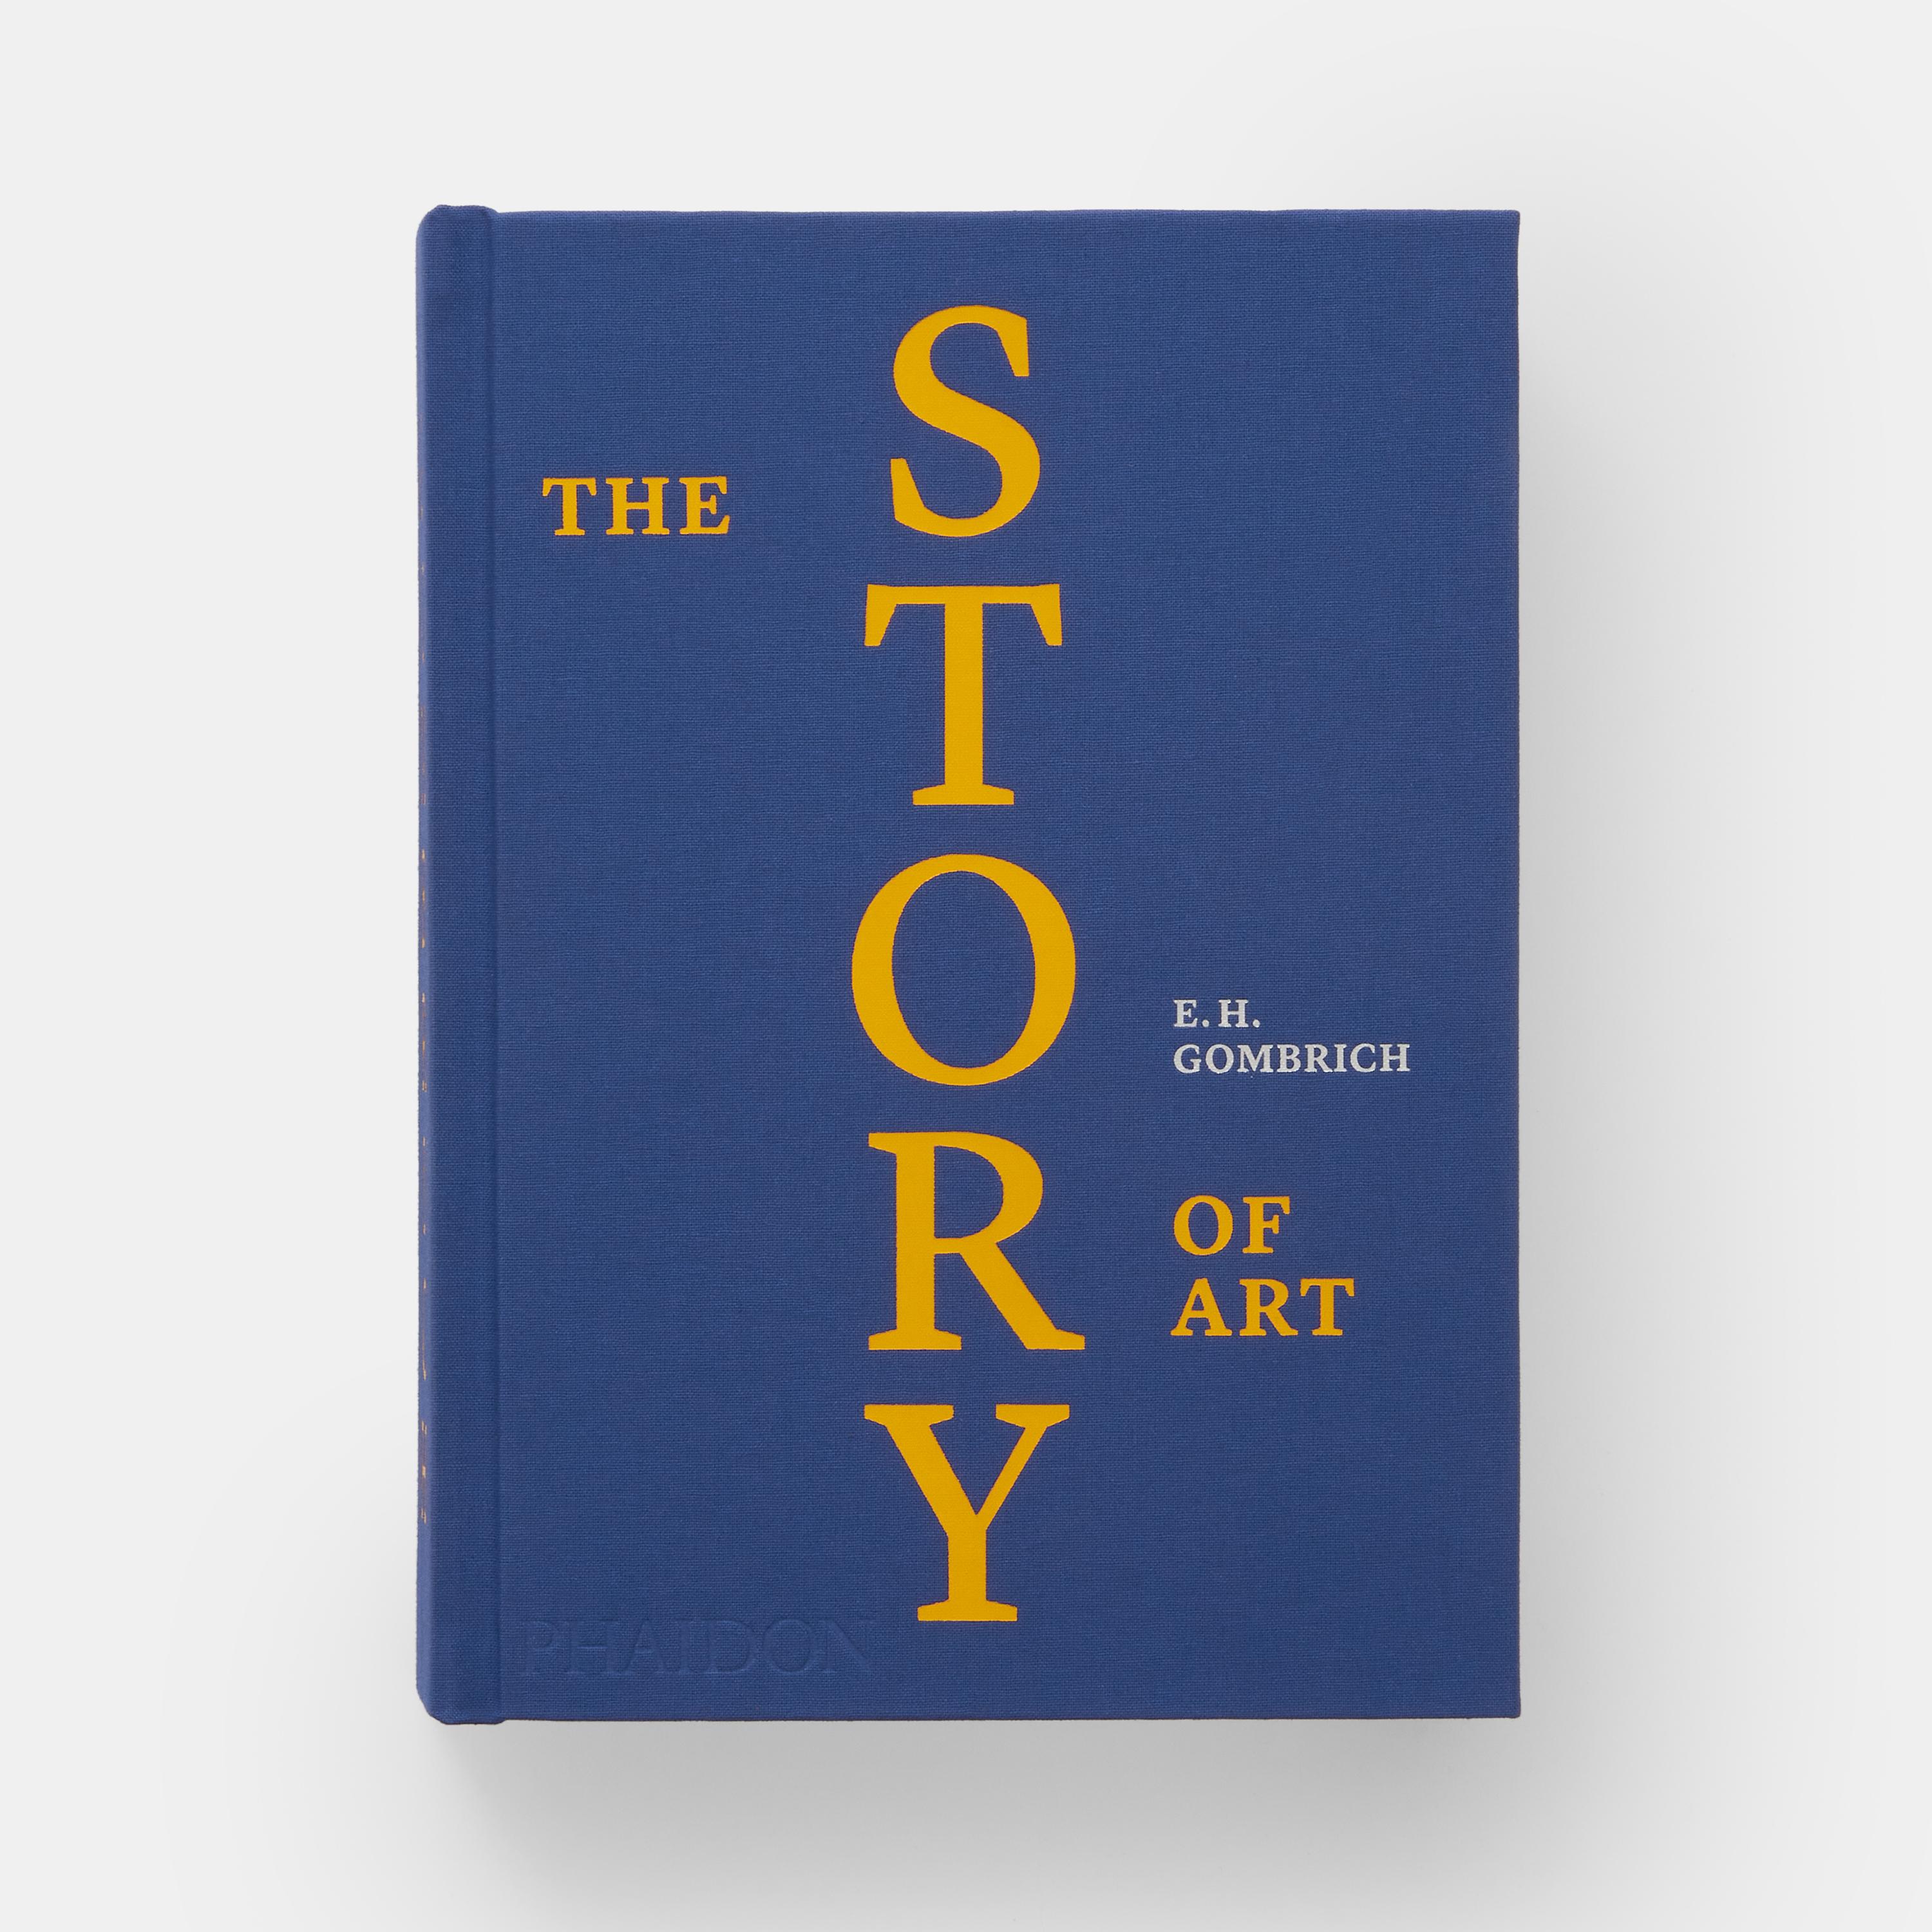 Exquisite cloth-bound edition of the classic art-history text – the ideal gift for every art connoisseur and student

For more than 70 years Sir Ernst Gombrich’s The Story of Art has been a global bestseller – with more than 8 million copies sold –